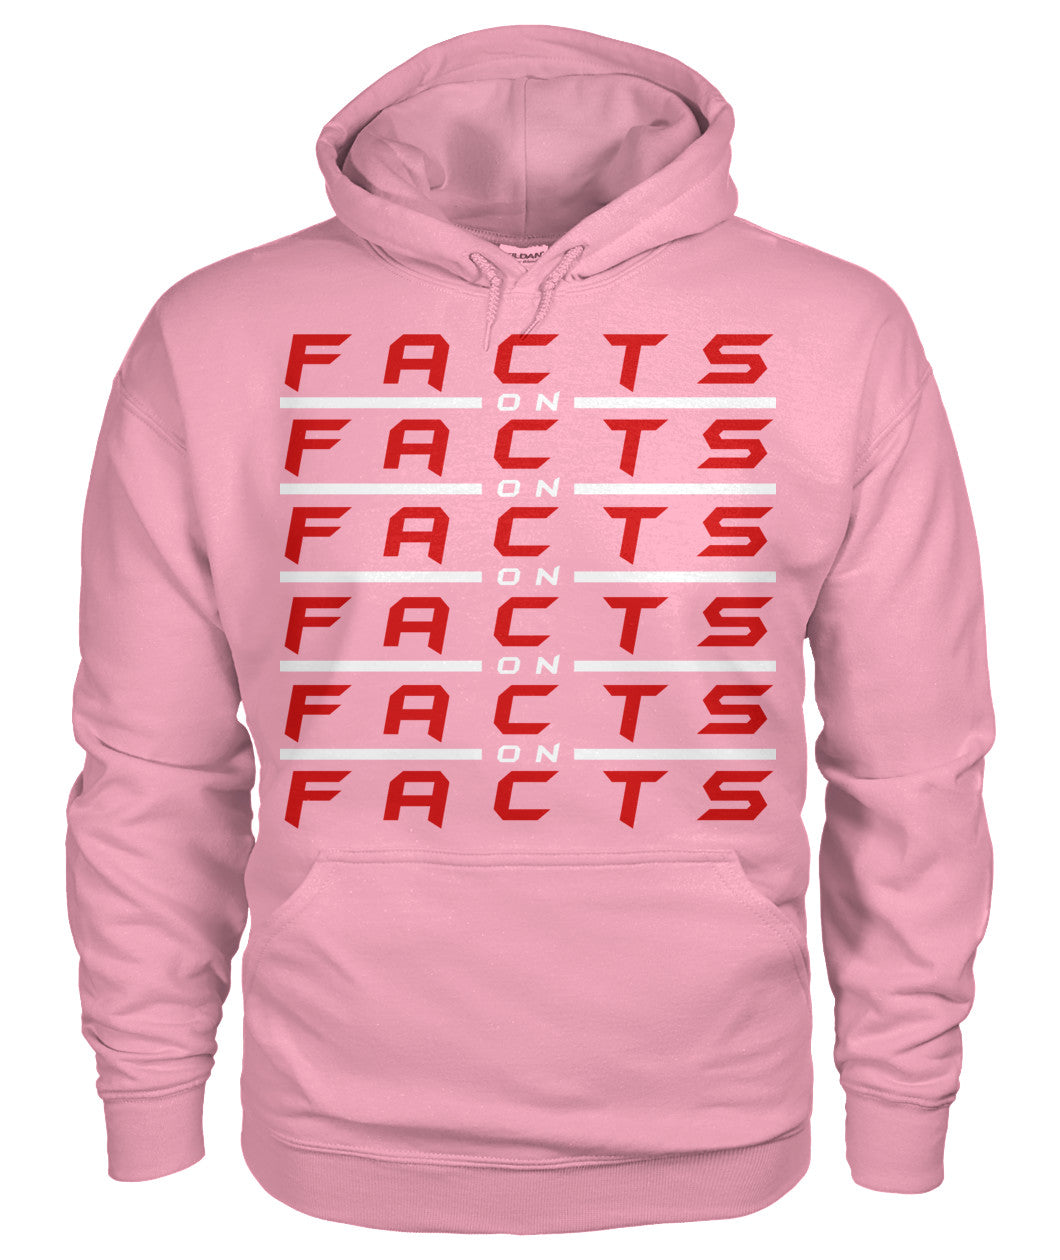 Facts on Facts (Hoodies)